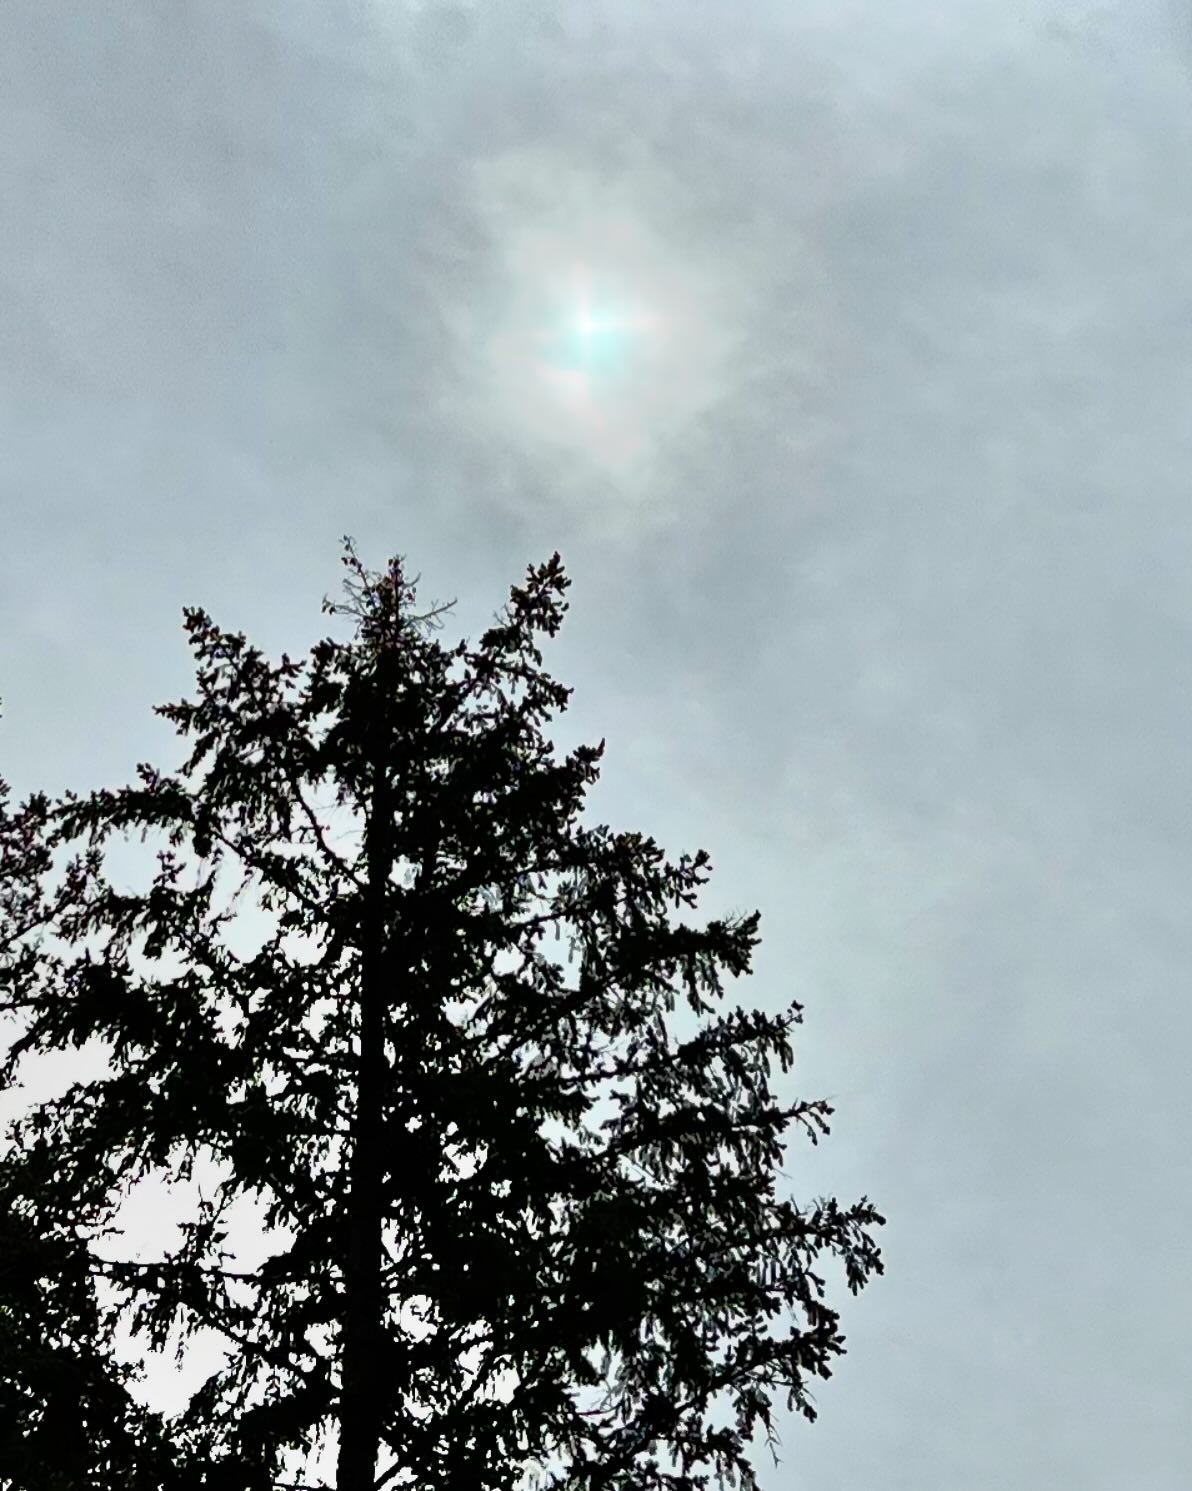 Well, it was too cloudy here in Cascadia to see much of a show, but if you look in the lower right corner, you can imagine where the moon is eclipsing the sun by 23%. 🖤

May this day find you all in awe of the cycles of your lives, in appreciation o